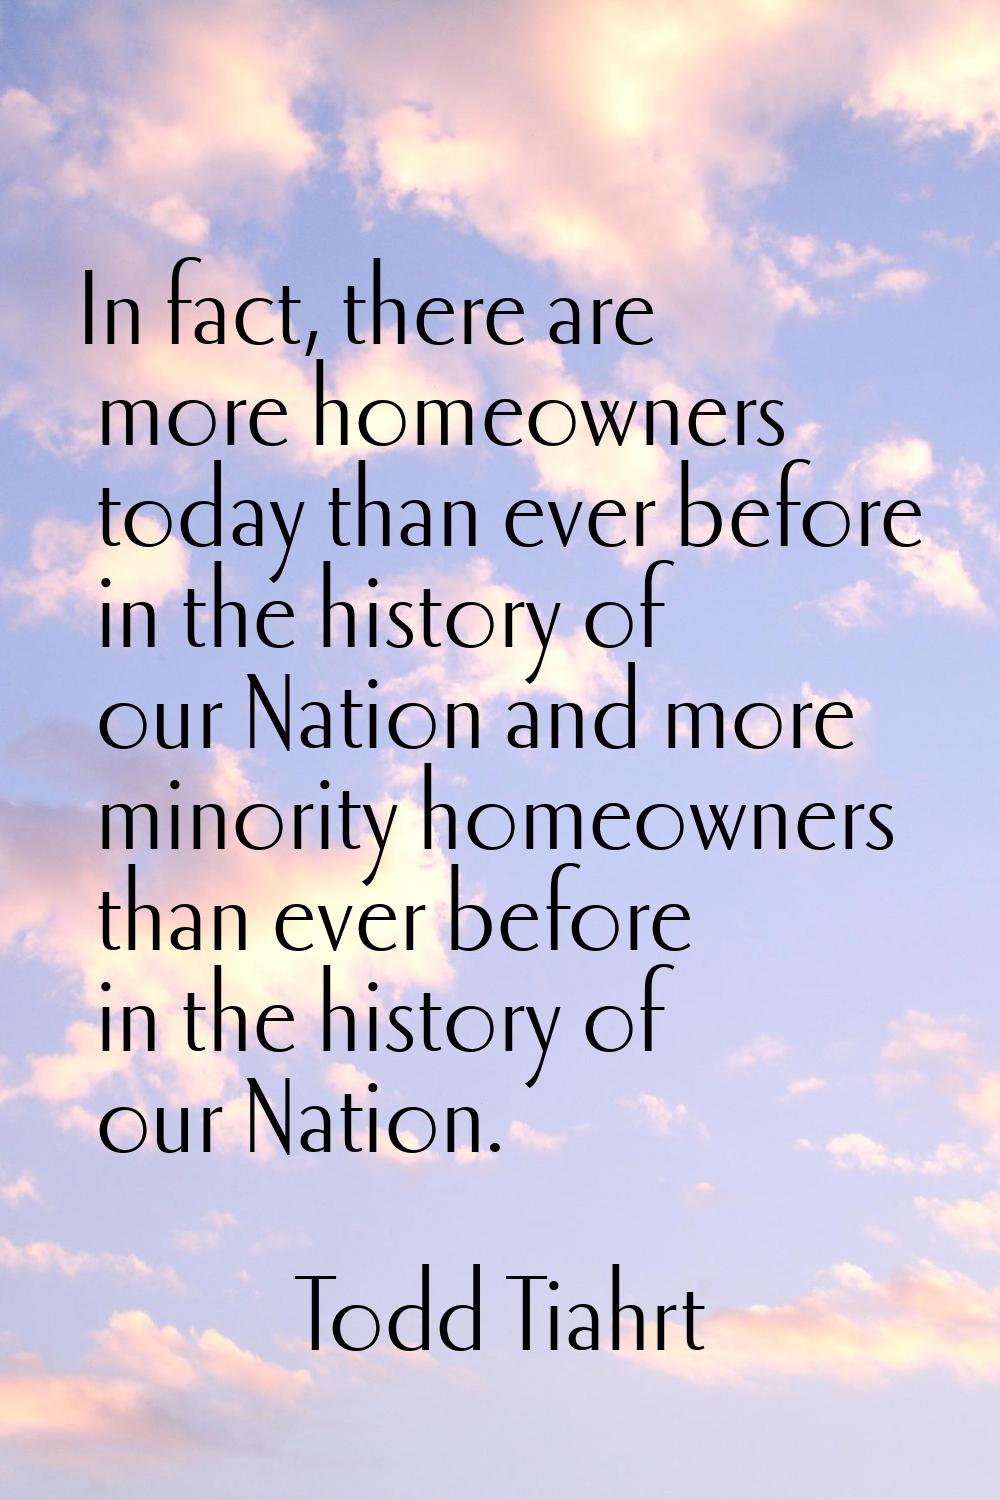 In fact, there are more homeowners today than ever before in the history of our Nation and more min